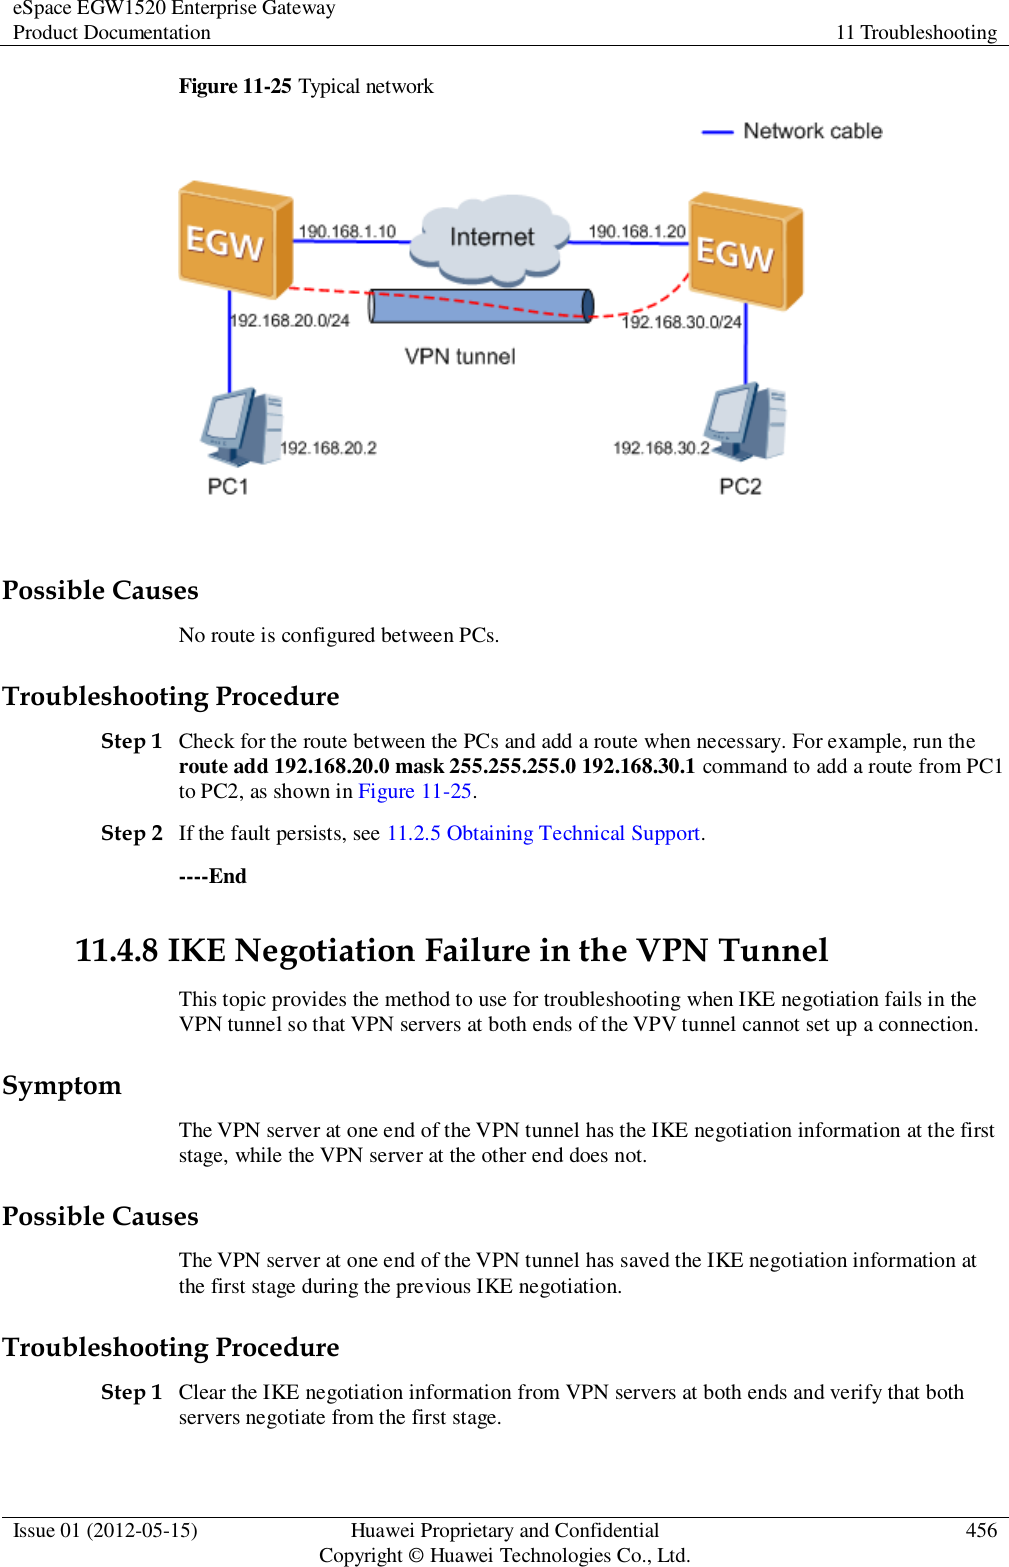 eSpace EGW1520 Enterprise Gateway Product Documentation 11 Troubleshooting  Issue 01 (2012-05-15) Huawei Proprietary and Confidential                                     Copyright © Huawei Technologies Co., Ltd. 456  Figure 11-25 Typical network   Possible Causes No route is configured between PCs. Troubleshooting Procedure Step 1 Check for the route between the PCs and add a route when necessary. For example, run the route add 192.168.20.0 mask 255.255.255.0 192.168.30.1 command to add a route from PC1 to PC2, as shown in Figure 11-25. Step 2 If the fault persists, see 11.2.5 Obtaining Technical Support. ----End 11.4.8 IKE Negotiation Failure in the VPN Tunnel This topic provides the method to use for troubleshooting when IKE negotiation fails in the VPN tunnel so that VPN servers at both ends of the VPV tunnel cannot set up a connection. Symptom The VPN server at one end of the VPN tunnel has the IKE negotiation information at the first stage, while the VPN server at the other end does not.   Possible Causes The VPN server at one end of the VPN tunnel has saved the IKE negotiation information at the first stage during the previous IKE negotiation. Troubleshooting Procedure Step 1 Clear the IKE negotiation information from VPN servers at both ends and verify that both servers negotiate from the first stage.  